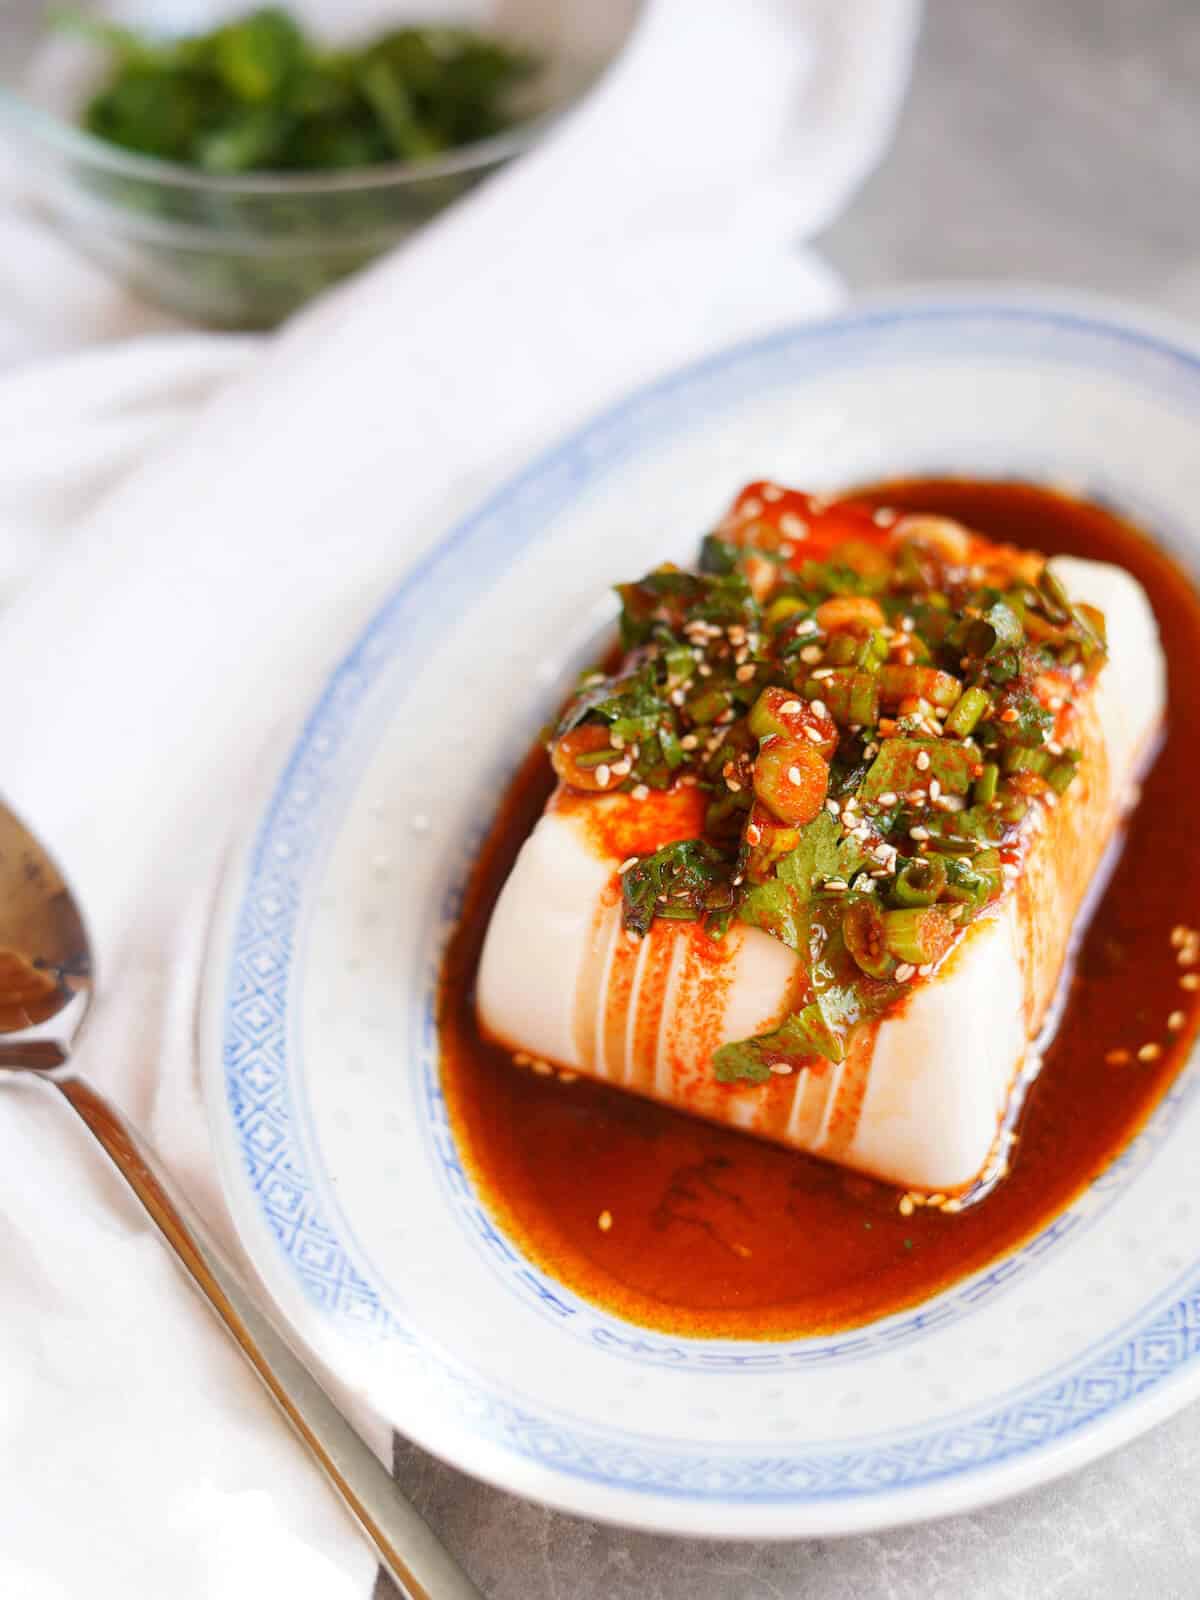 A classic from the soft tofu recipes is this cold tofu served which is served on a plate with a red green onions sauce on top.